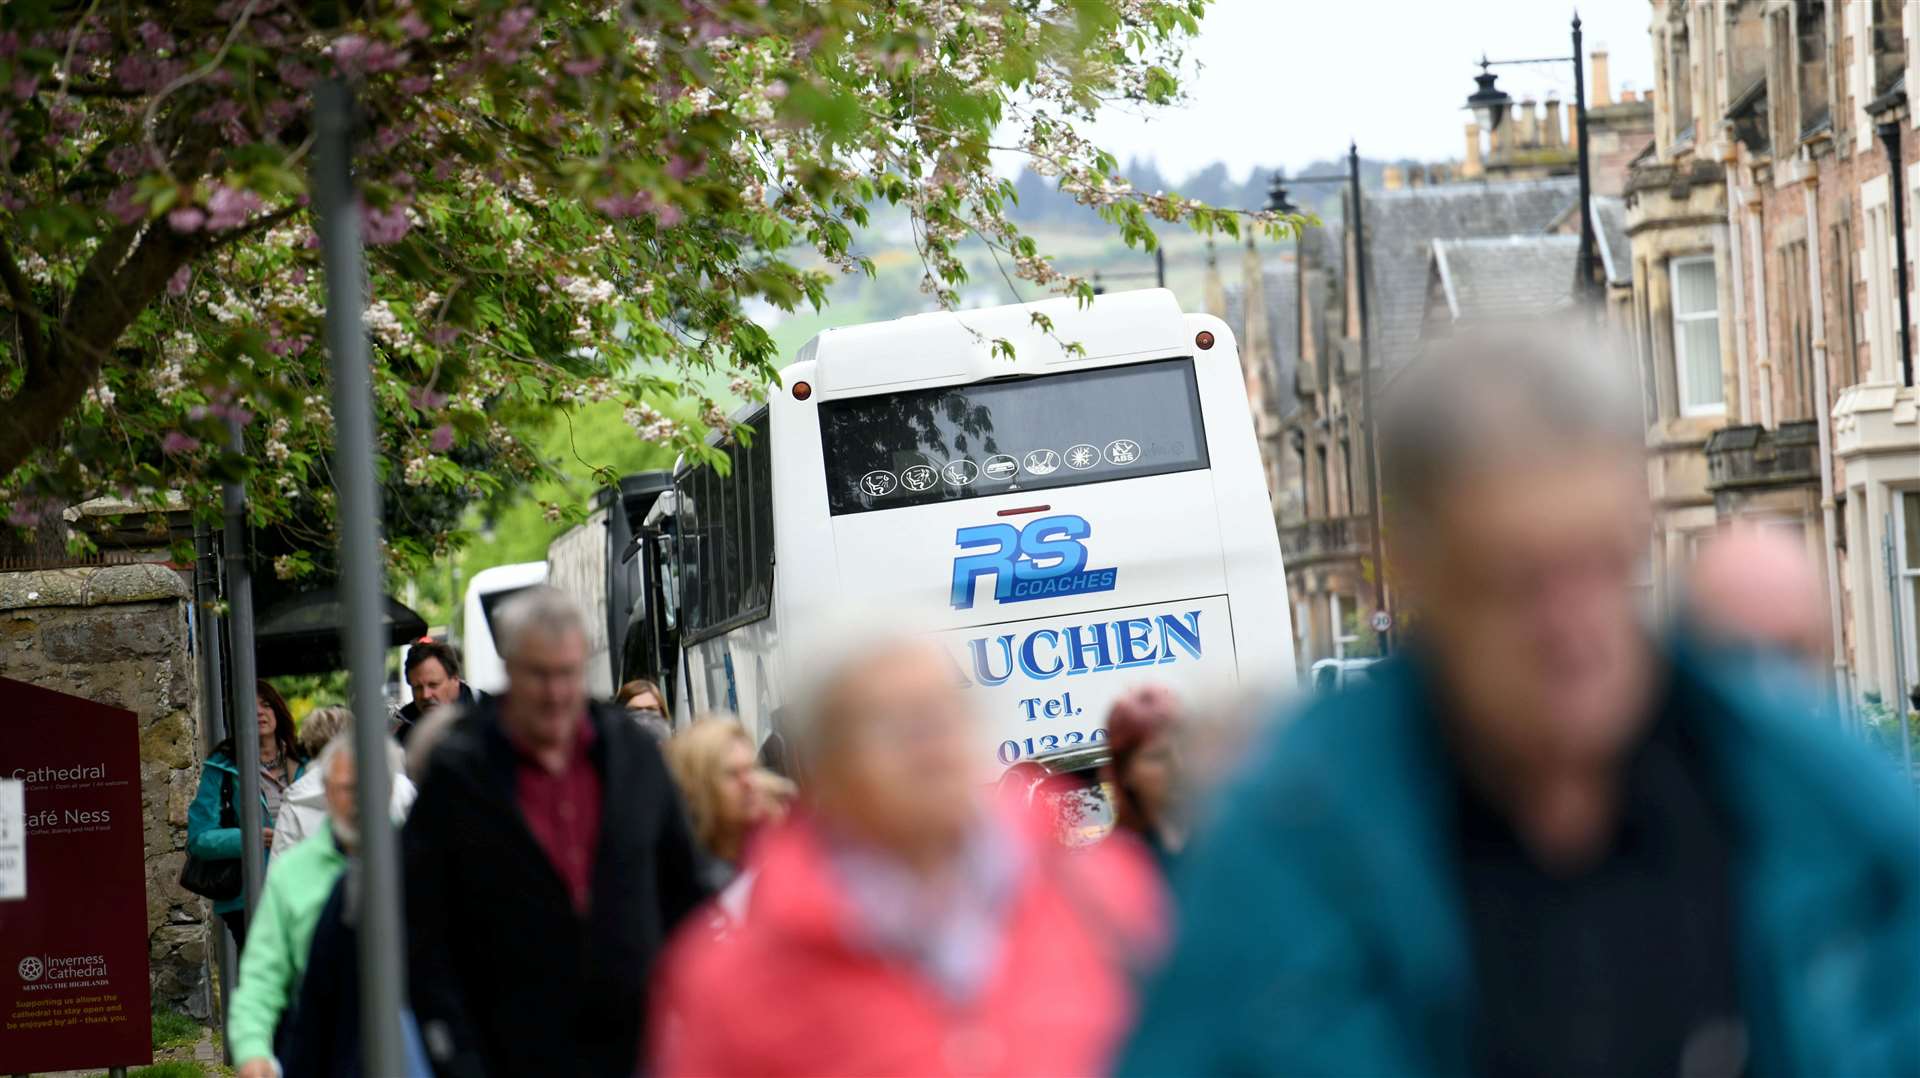 Touring coaches are a regular sight on Ardross Street in Inverness.